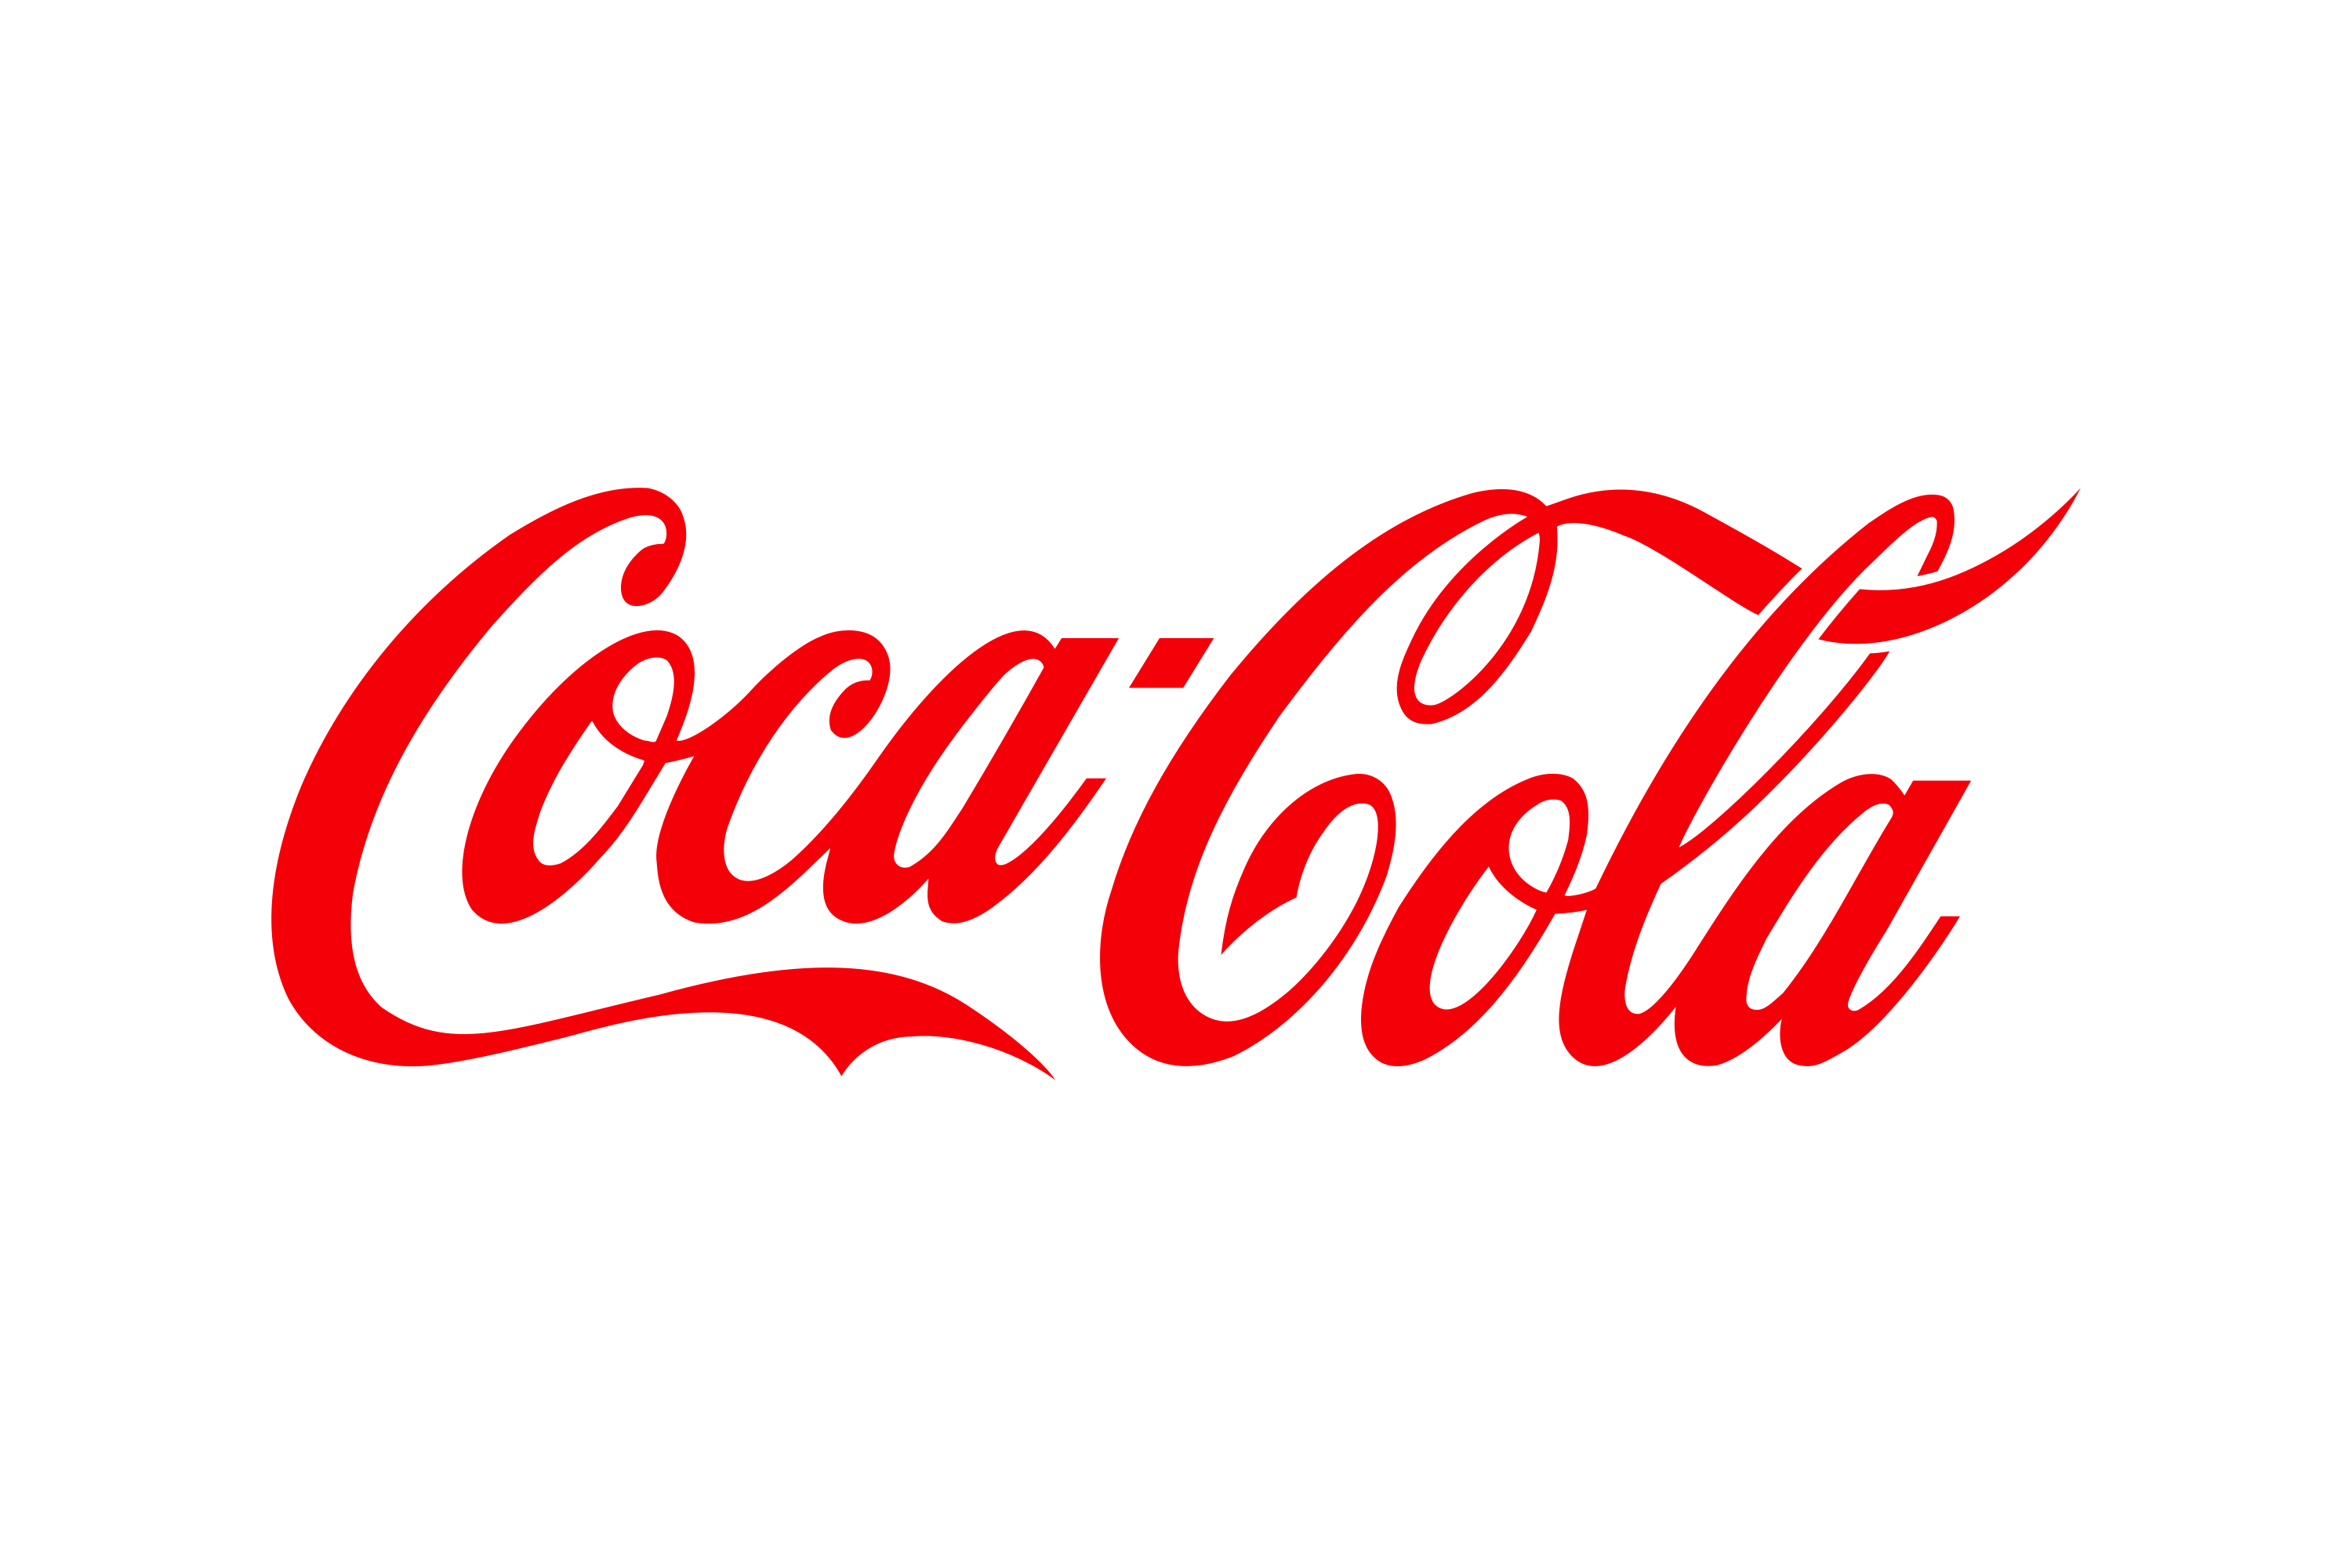 Coca-Cola's vision - logo courtesy of Wikipaedia Commons